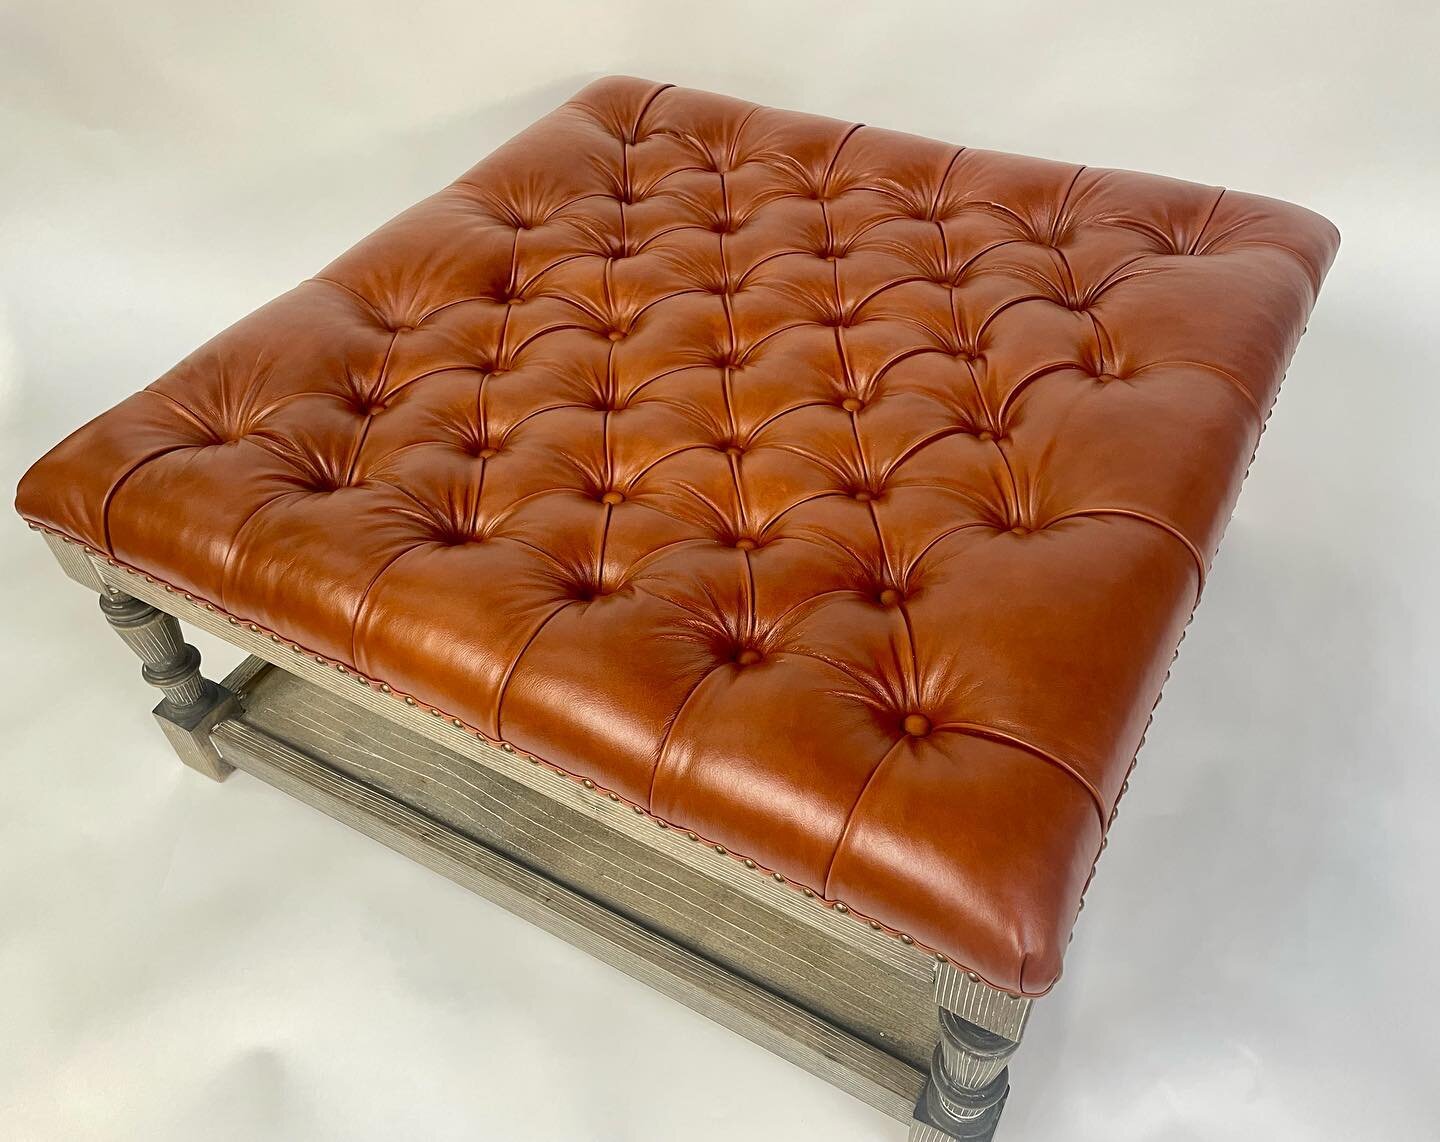 Here we have a tufted ottoman that our upholstery team recently wrapped up!

#leatherinteriordesign #leatherupholstery #furnitureupholstery #tuftedottoman #tuftedleather #leatherrestoration #houstoninteriordesign #texasinteriordesigner